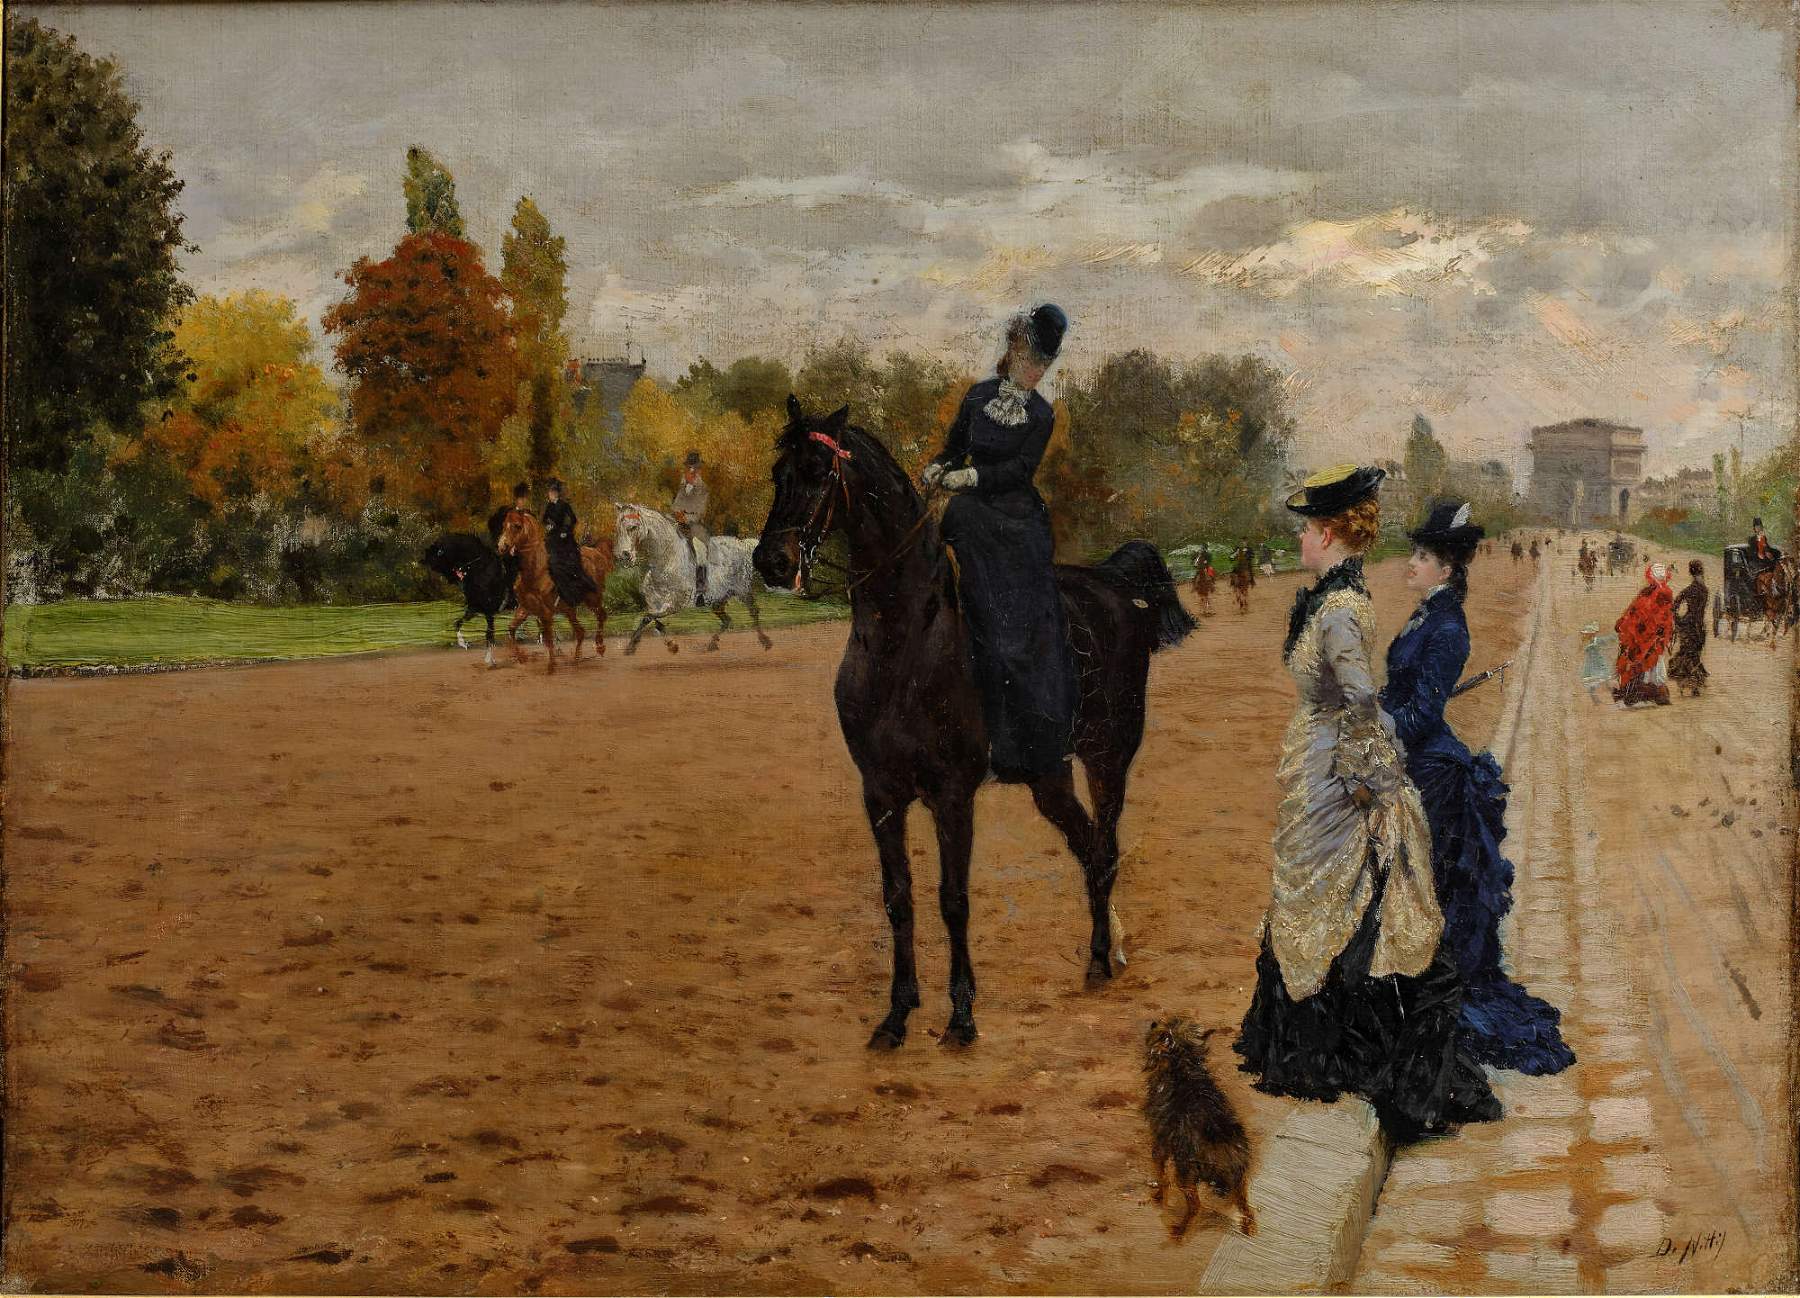 Milan, an exhibition on Giuseppe De Nittis at Palazzo Reale with more than 90 works